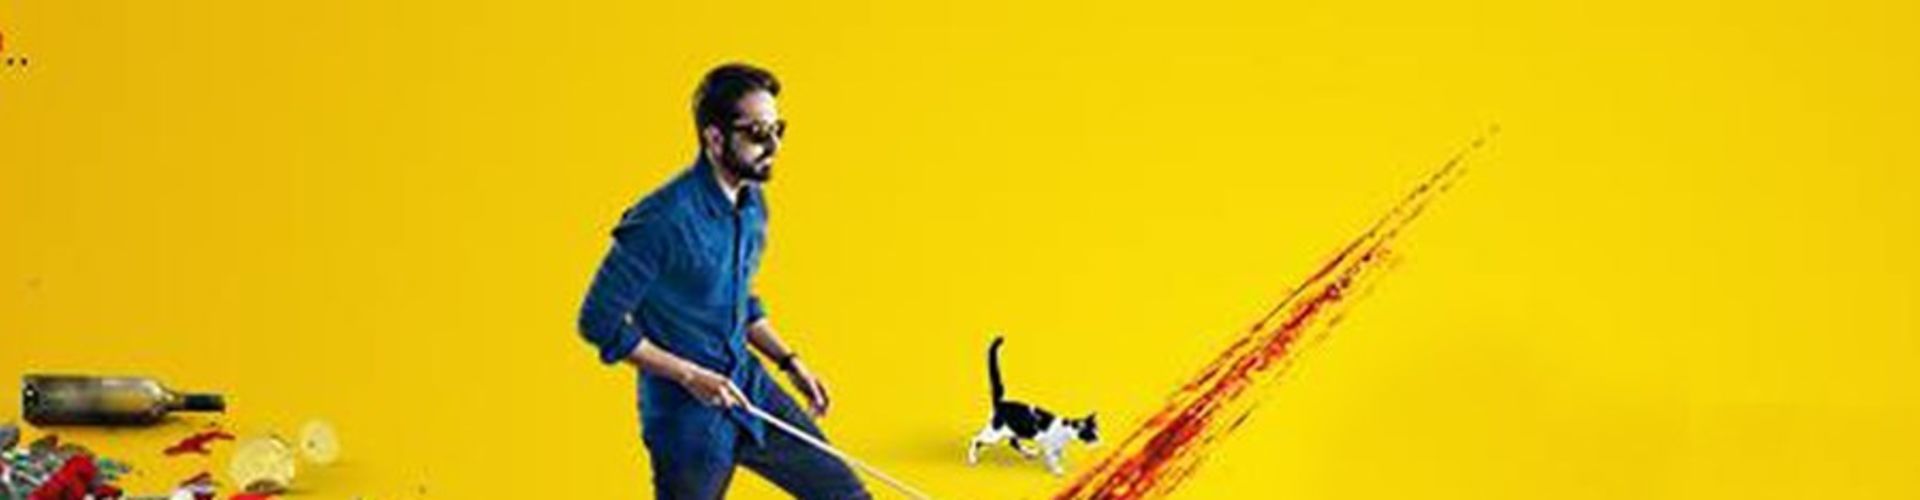 Andhadhun has been a one the best films in the last few years: Divya Dutta